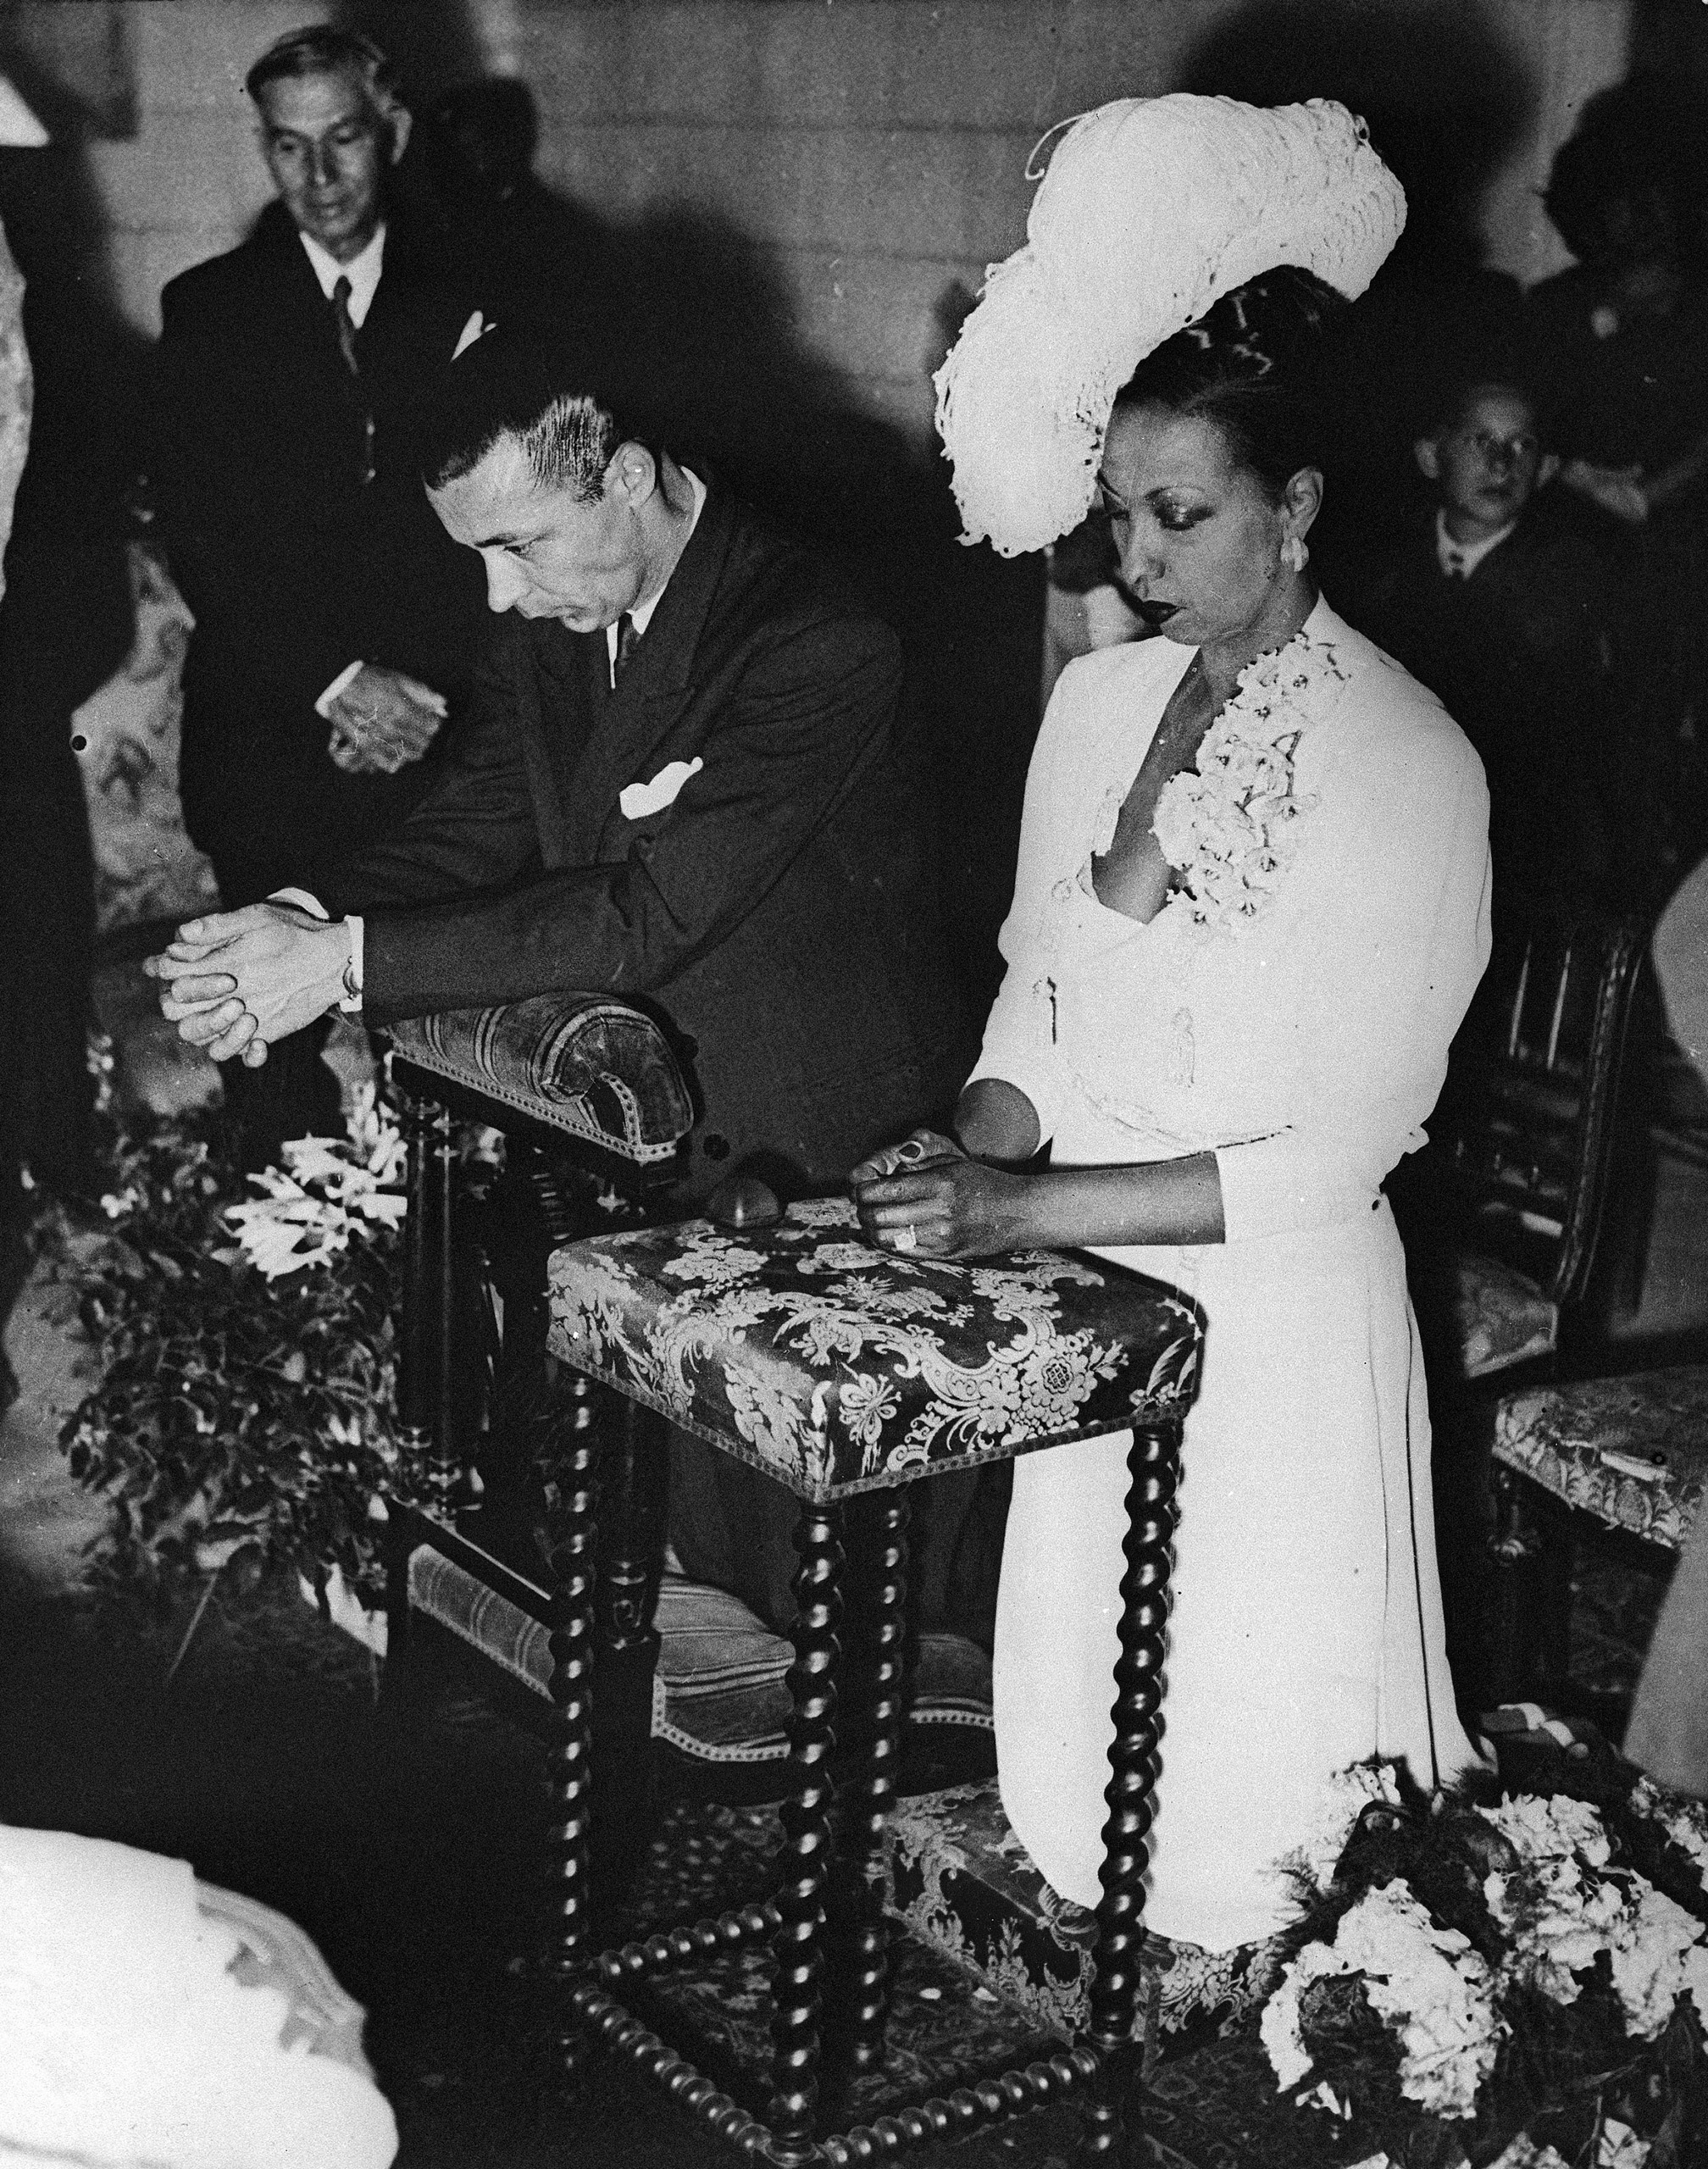 Josephine Baker and Jo Bouillon are seen June 5, 1947, during their marriage ceremony at her home, Chateau des Milandes, near St. Cyprien in southern France.